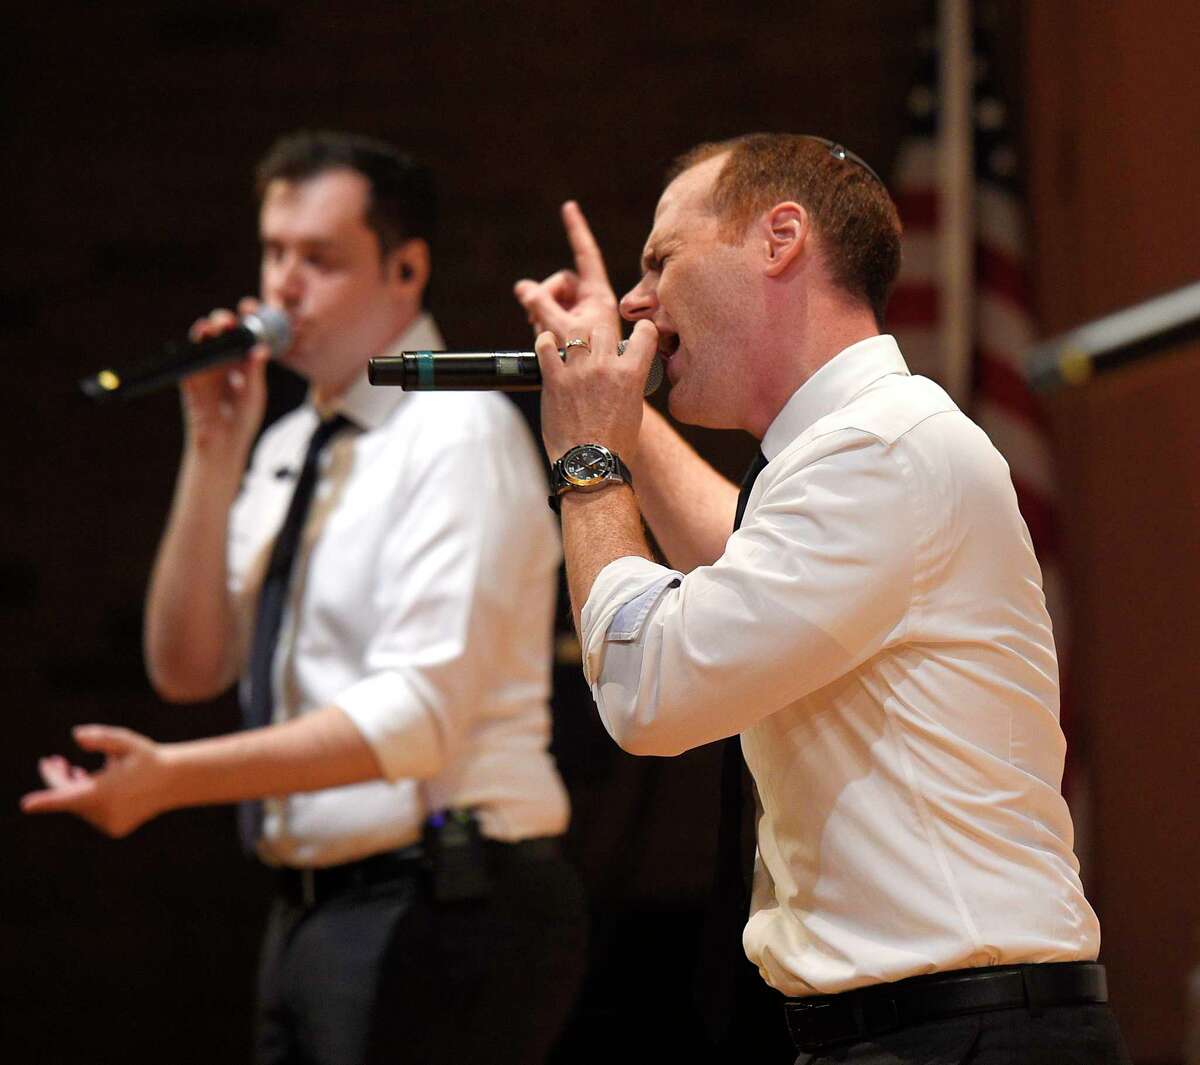 Photos from the Maccabeats Chanukah Concert at Greenwich Library's Cole Auditorium in Greenwich, Conn. Sunday, Dec. 2, 2018. Presented by Chabad Greenwich, the Jewish a capella group entertained a packed house with a variety of modern pop songs, remixes and Chanukah-themed songs.